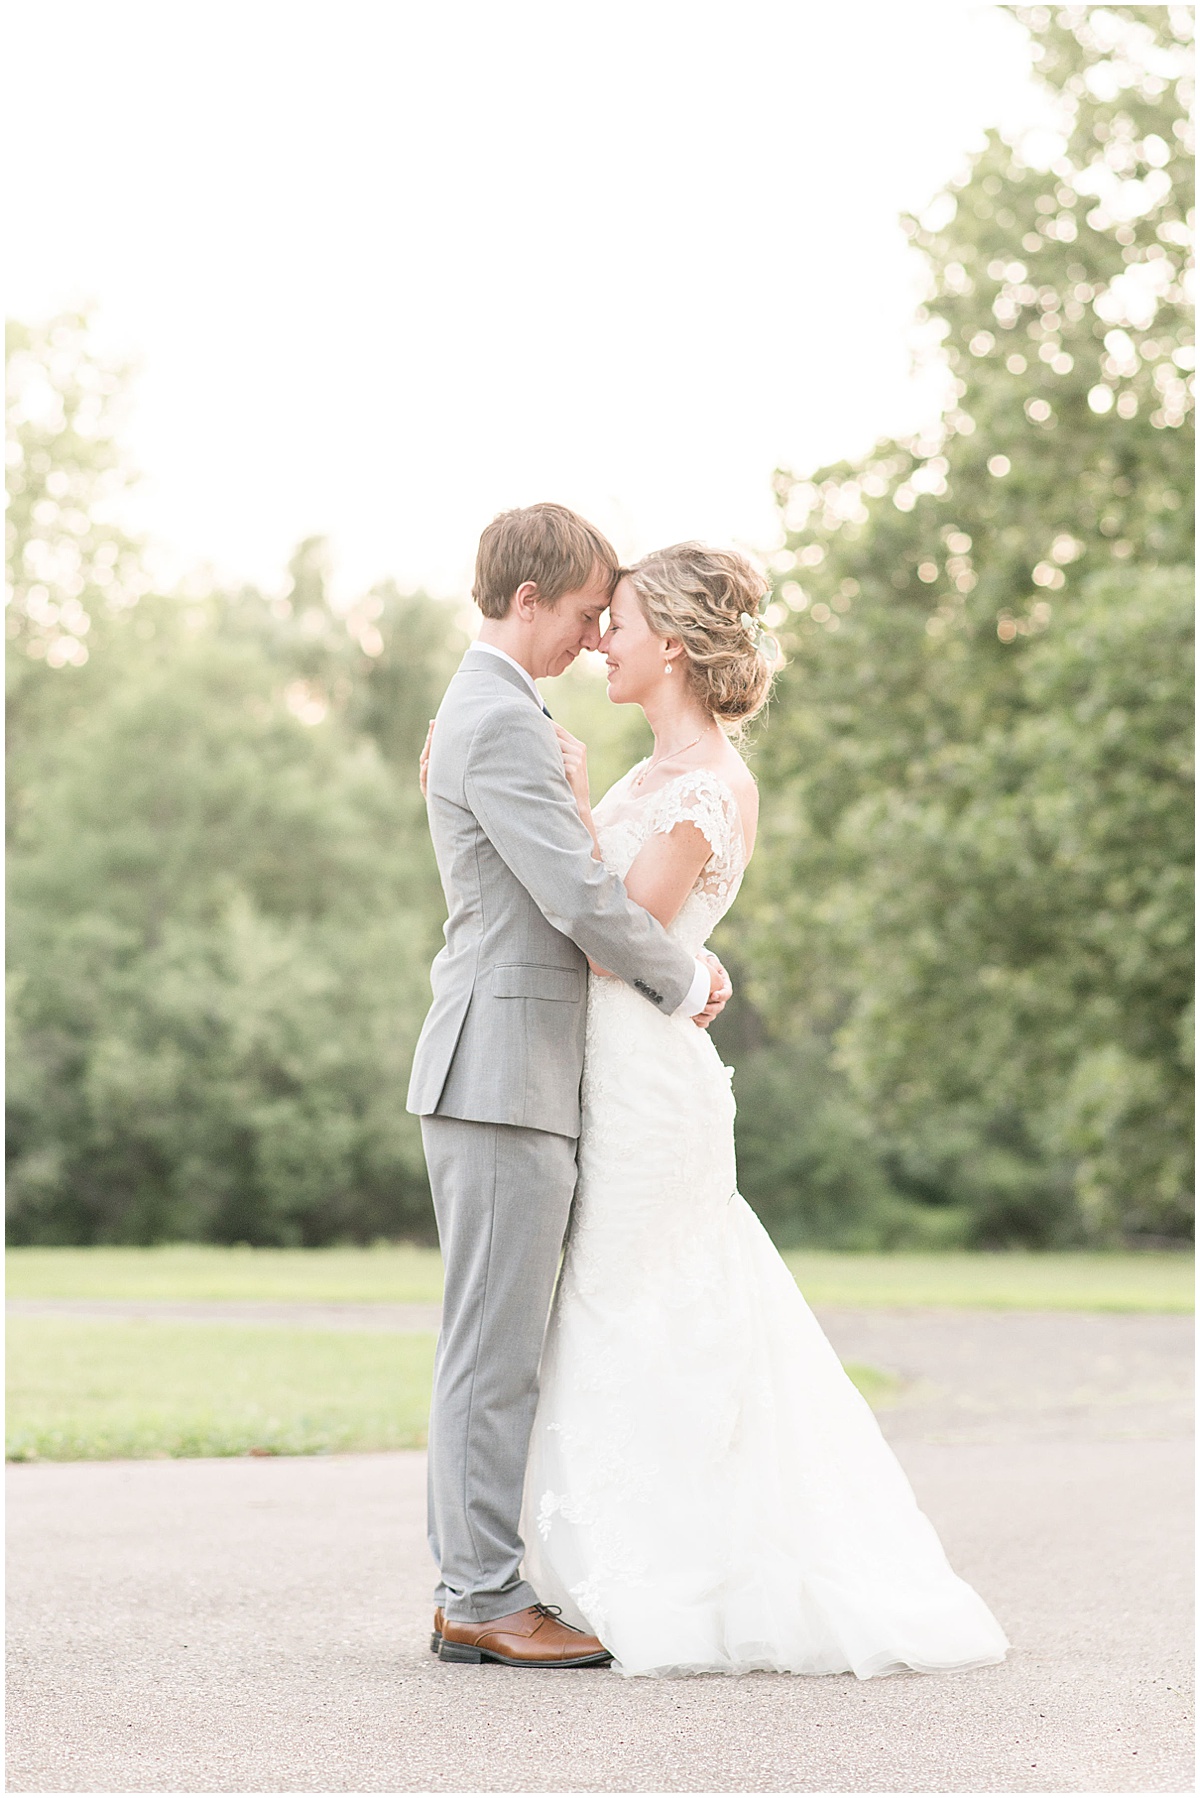 Just married photos after wedding at The Matterhorn in Elkhart, Indiana by Victoria Rayburn Photography